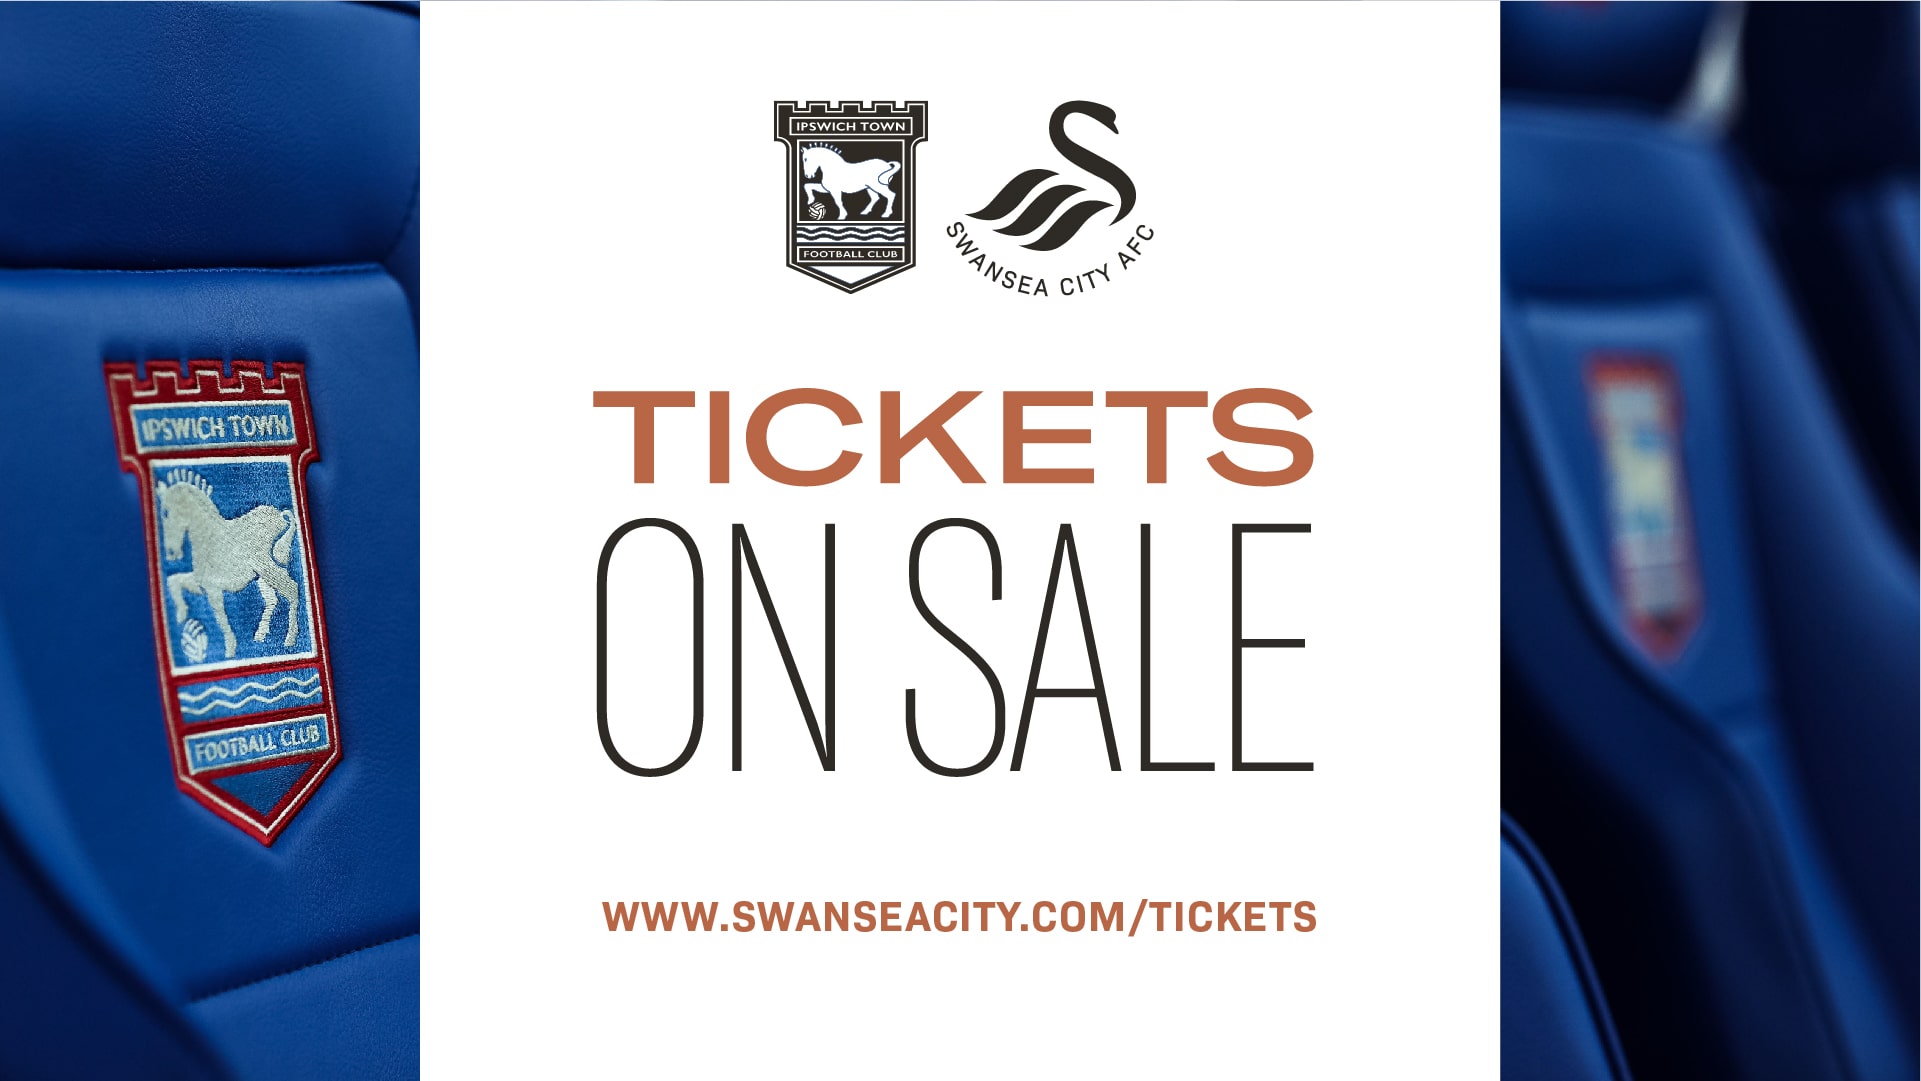 Ipswich Town away tickets on sale now